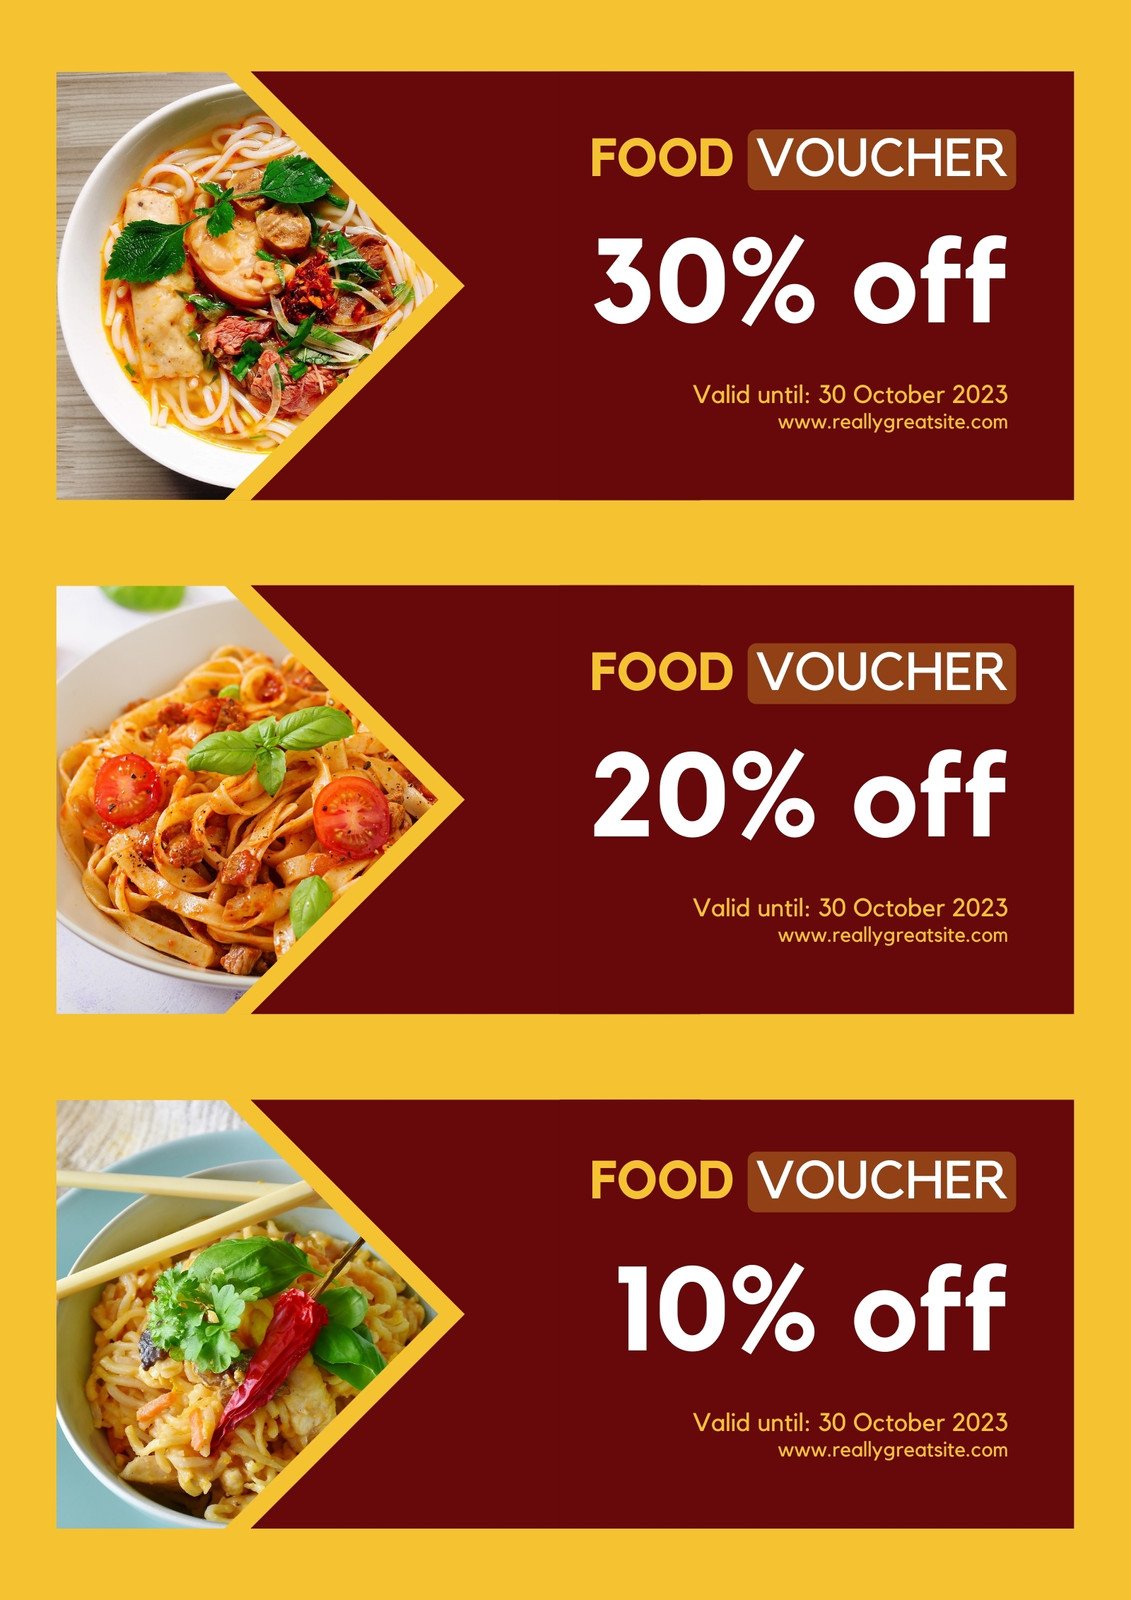 Affordable dining vouchers